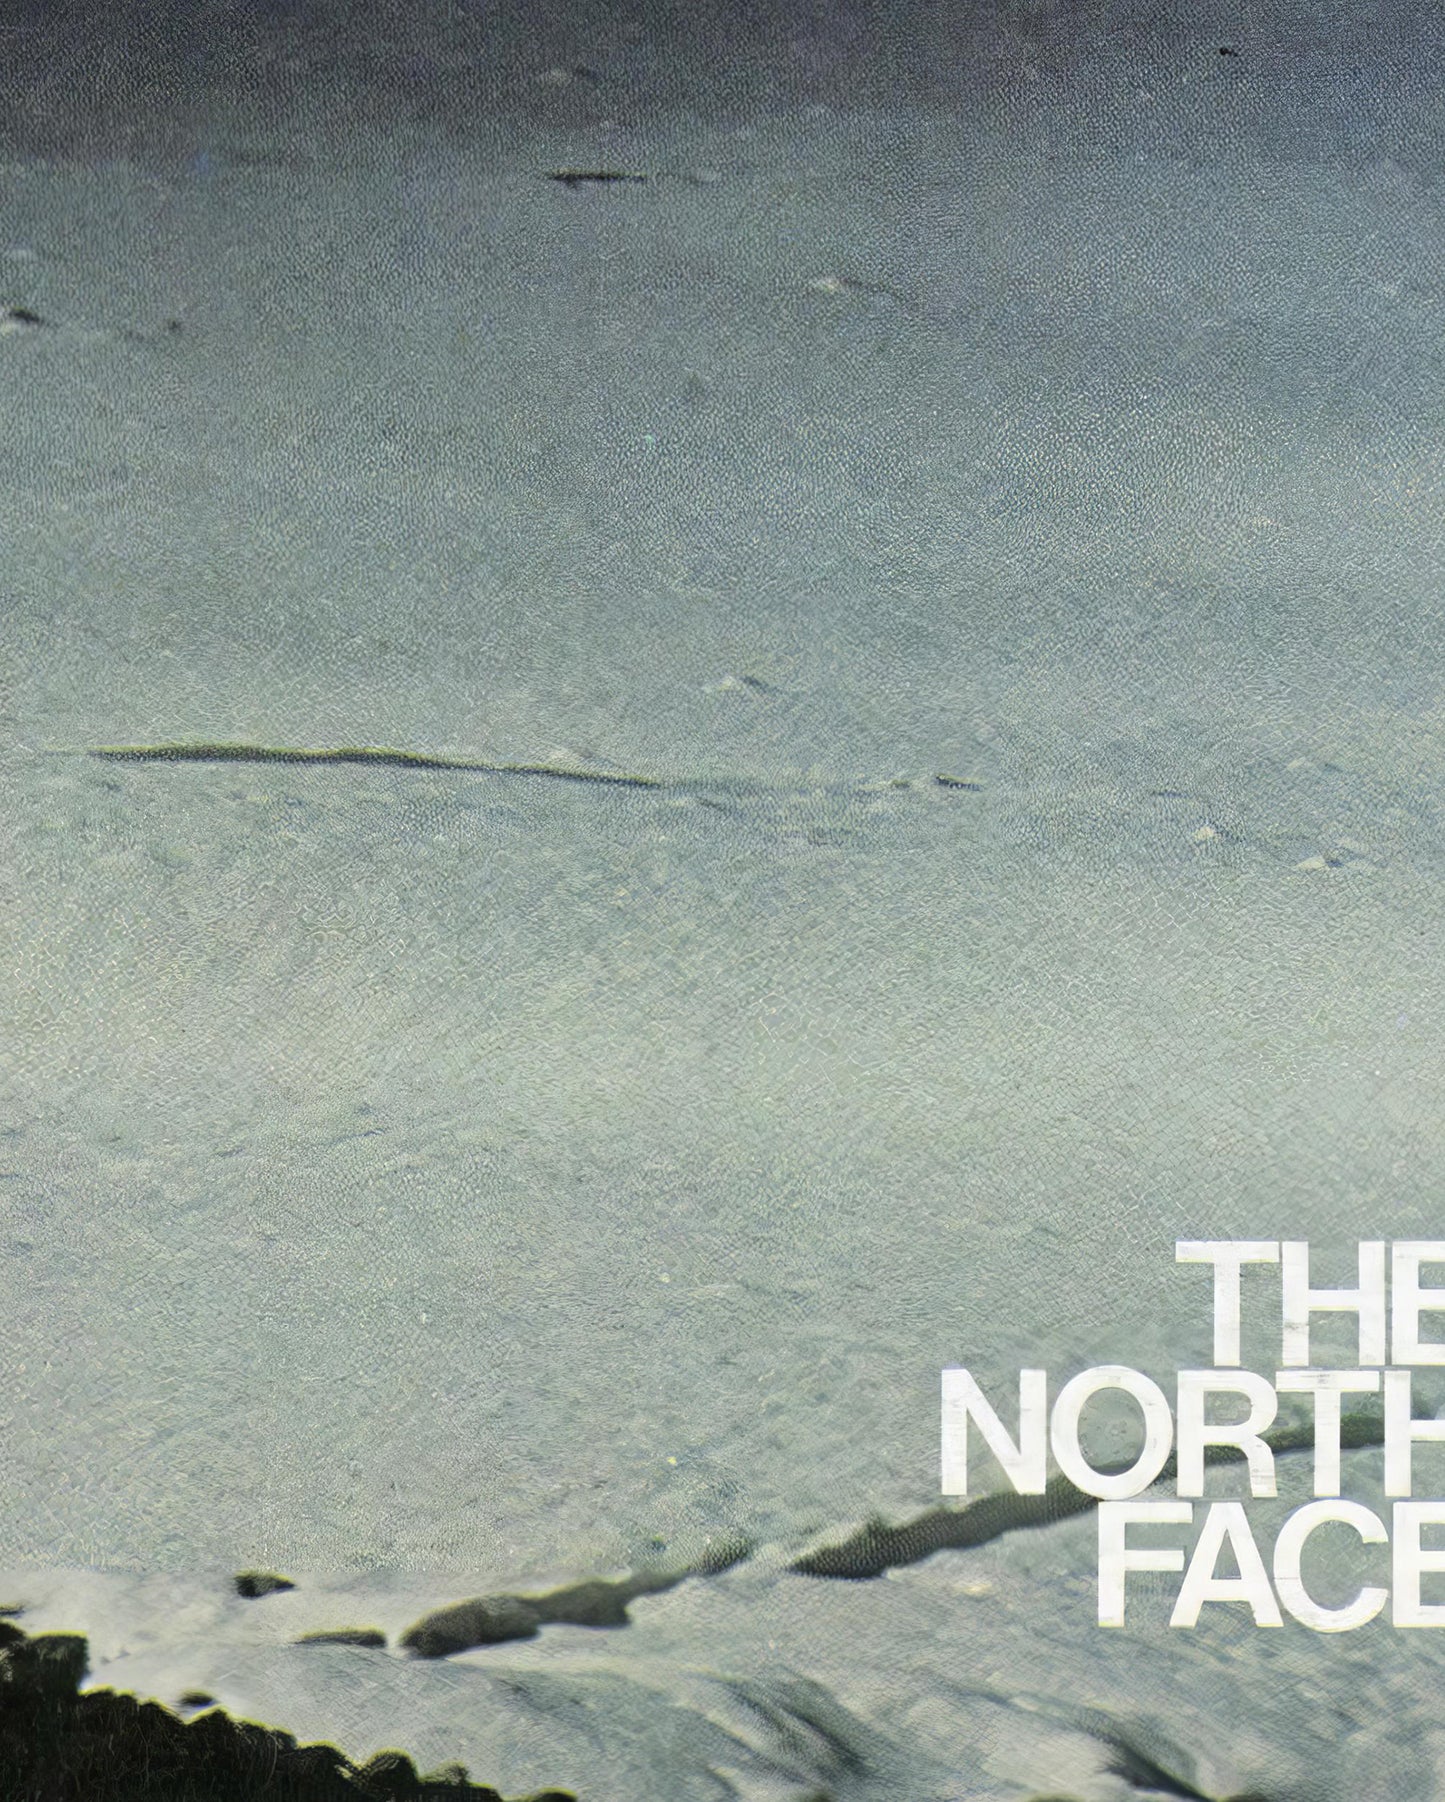 The North Face 1984-1985 Magazine Front Cover Poster